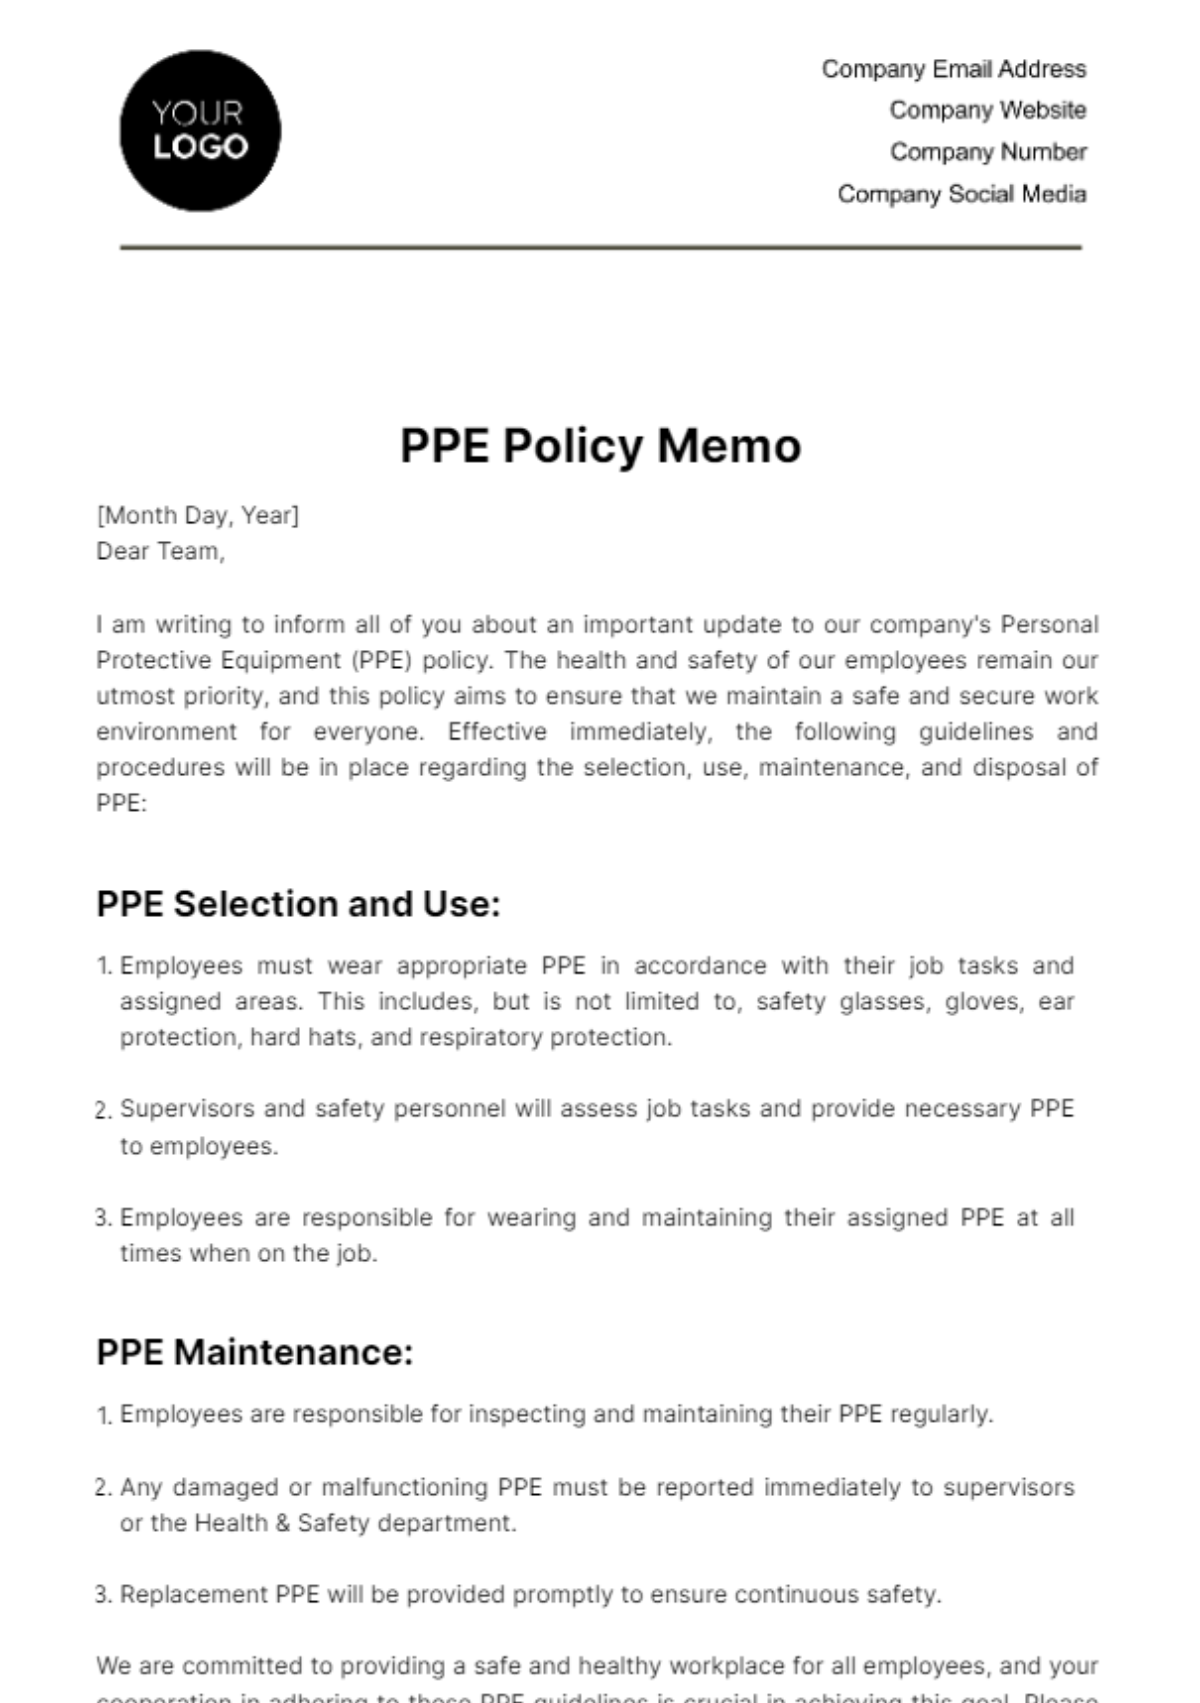 PPE Policy Memo Template